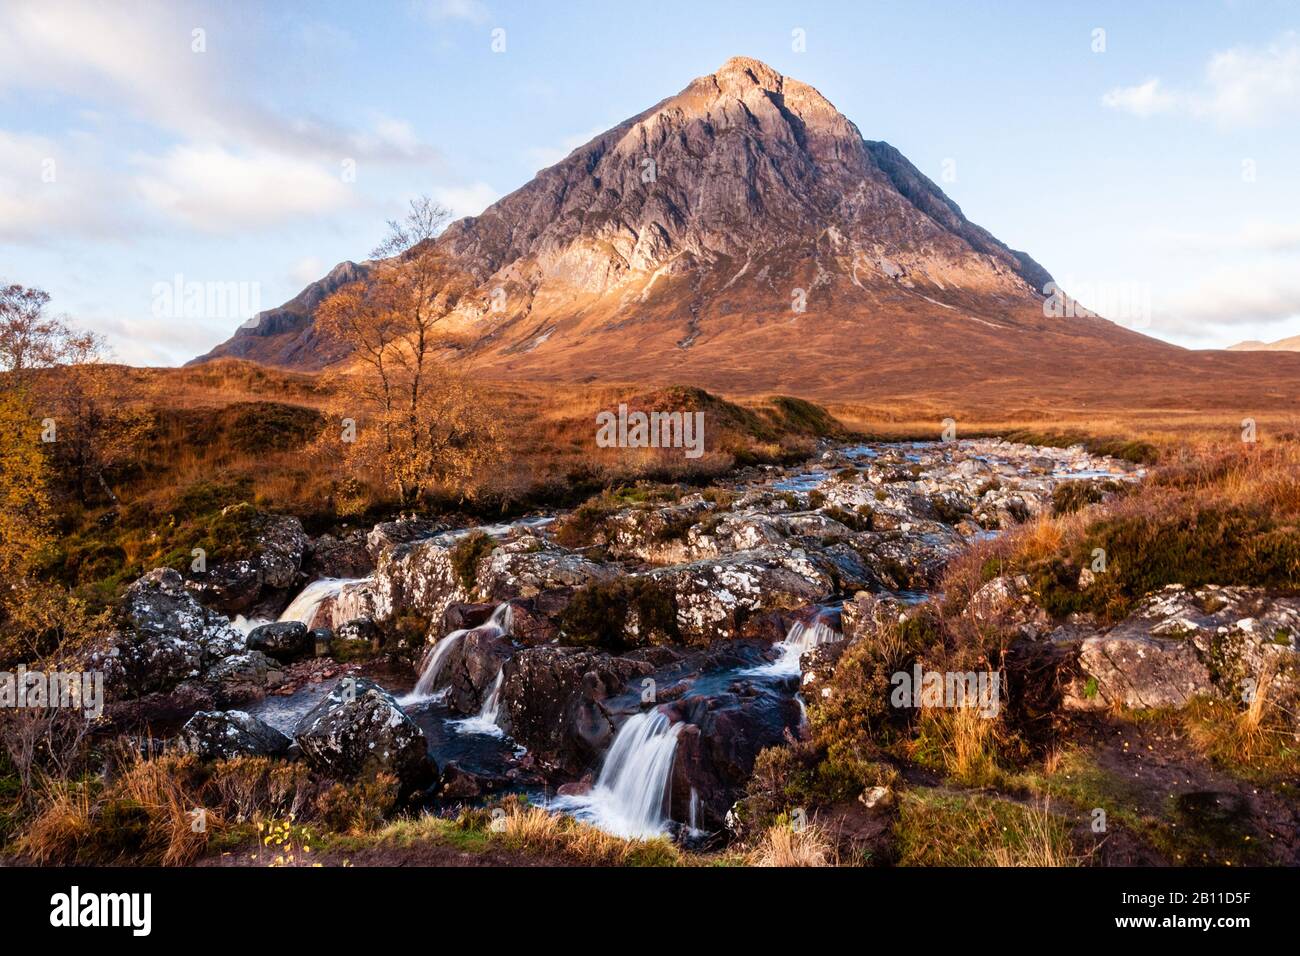 One of Scotland's most iconic mountains, Stob Dearg at the eastern end of Buachaille Etive Mor stands at the head of Glen Coe. Stock Photo